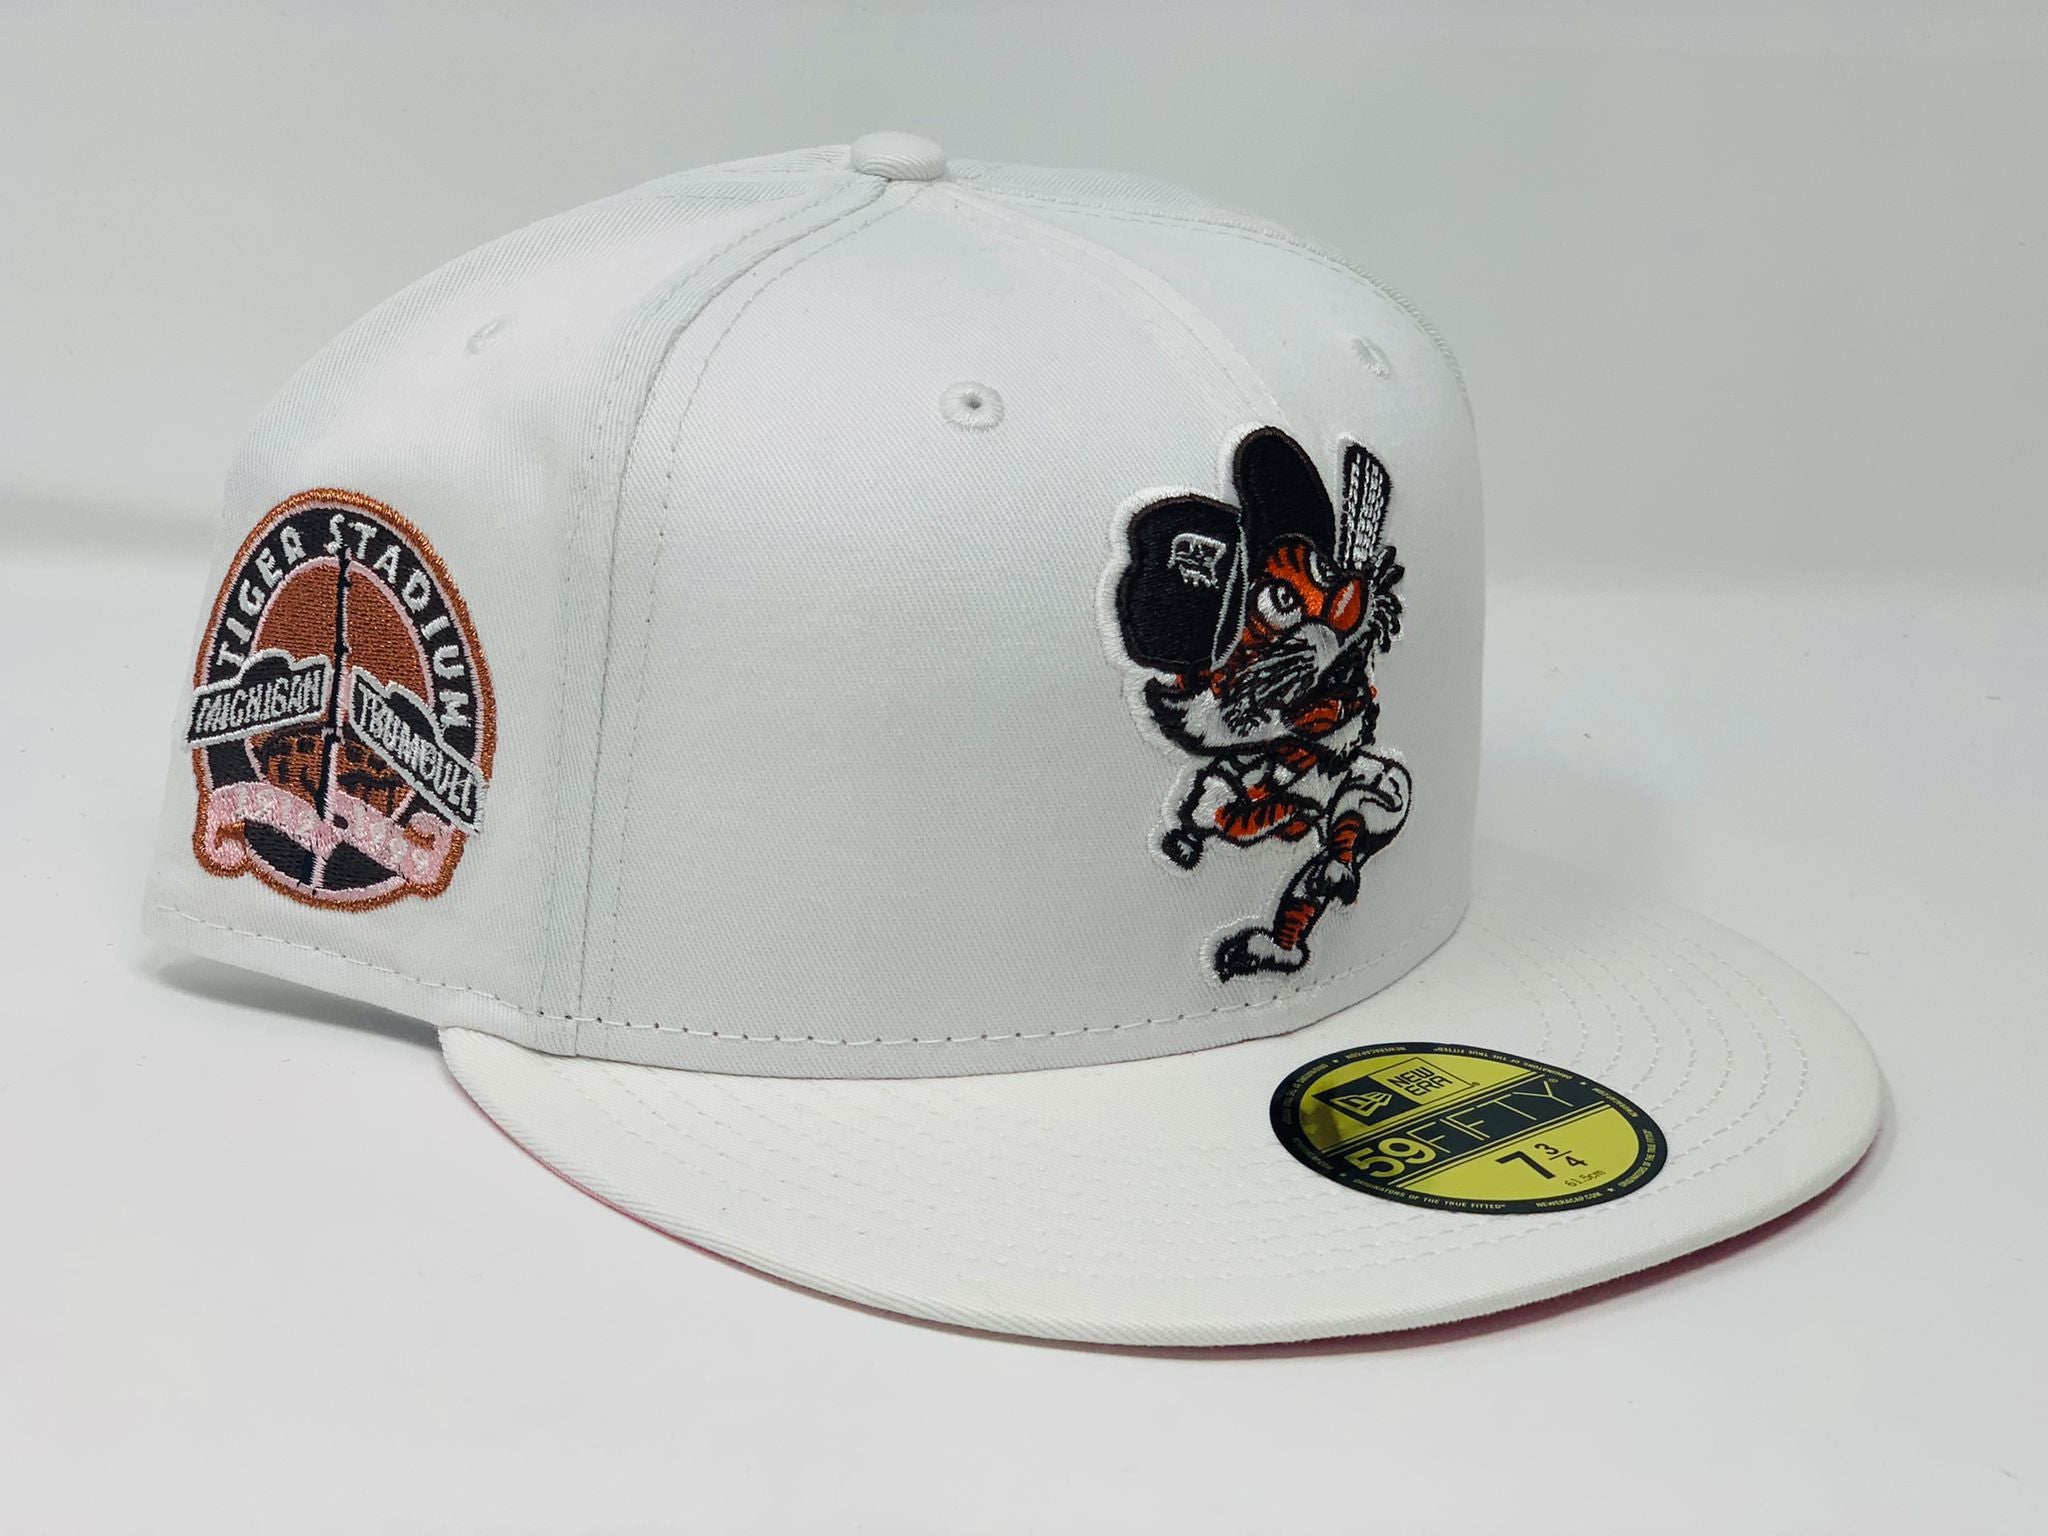 Men's New Era White/Navy Detroit Tigers Optic 59FIFTY Fitted Hat